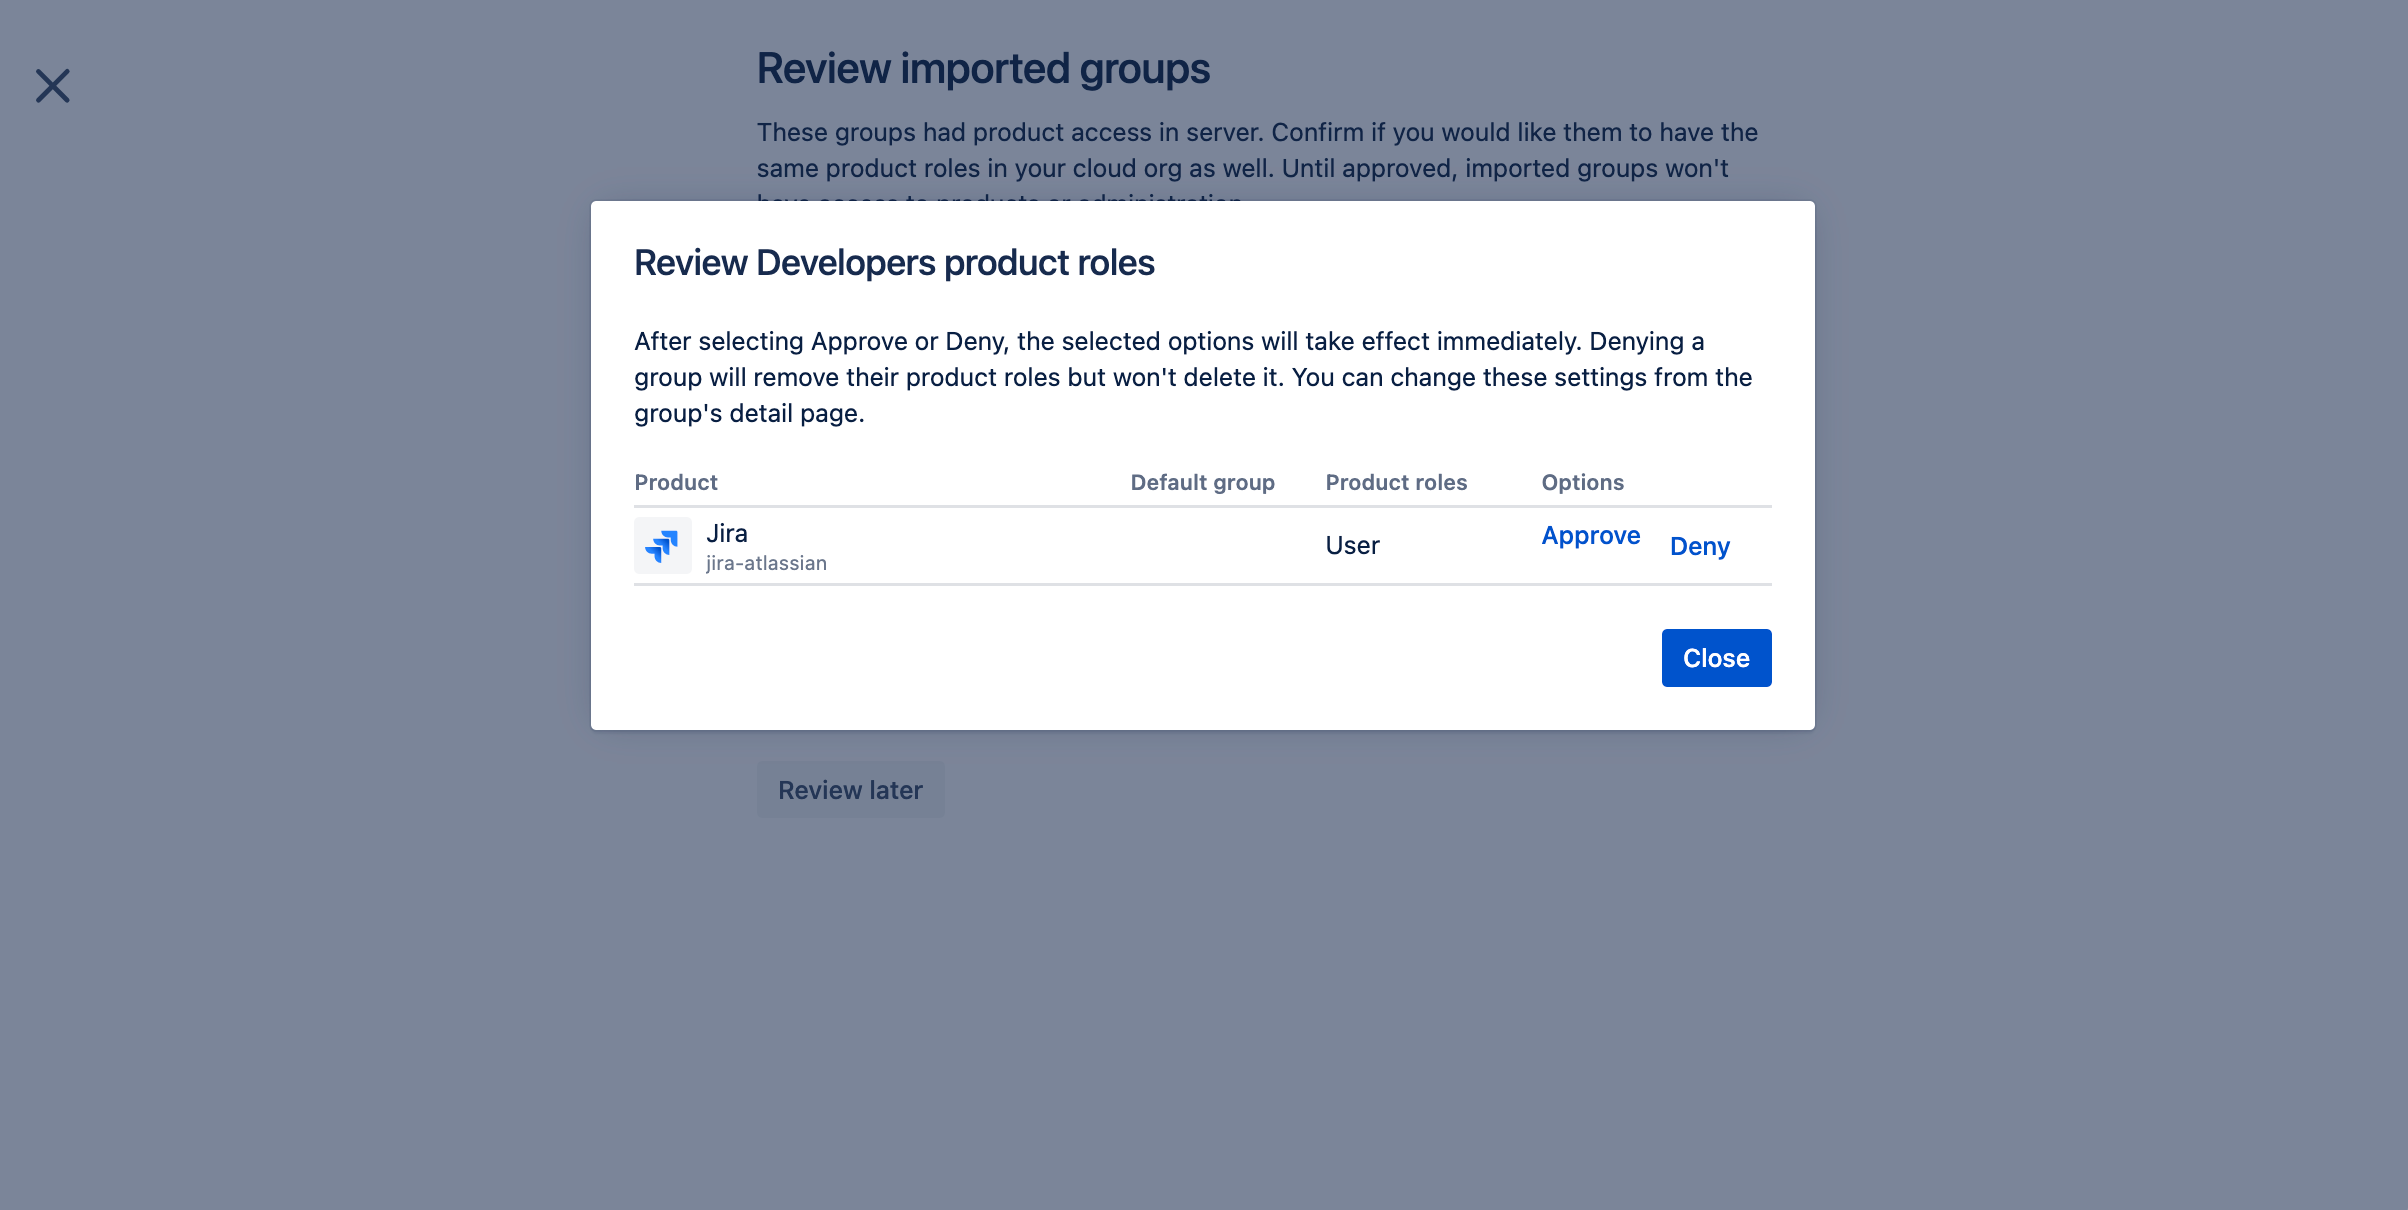 Options to approve or deny product access for one of the migrated groups.